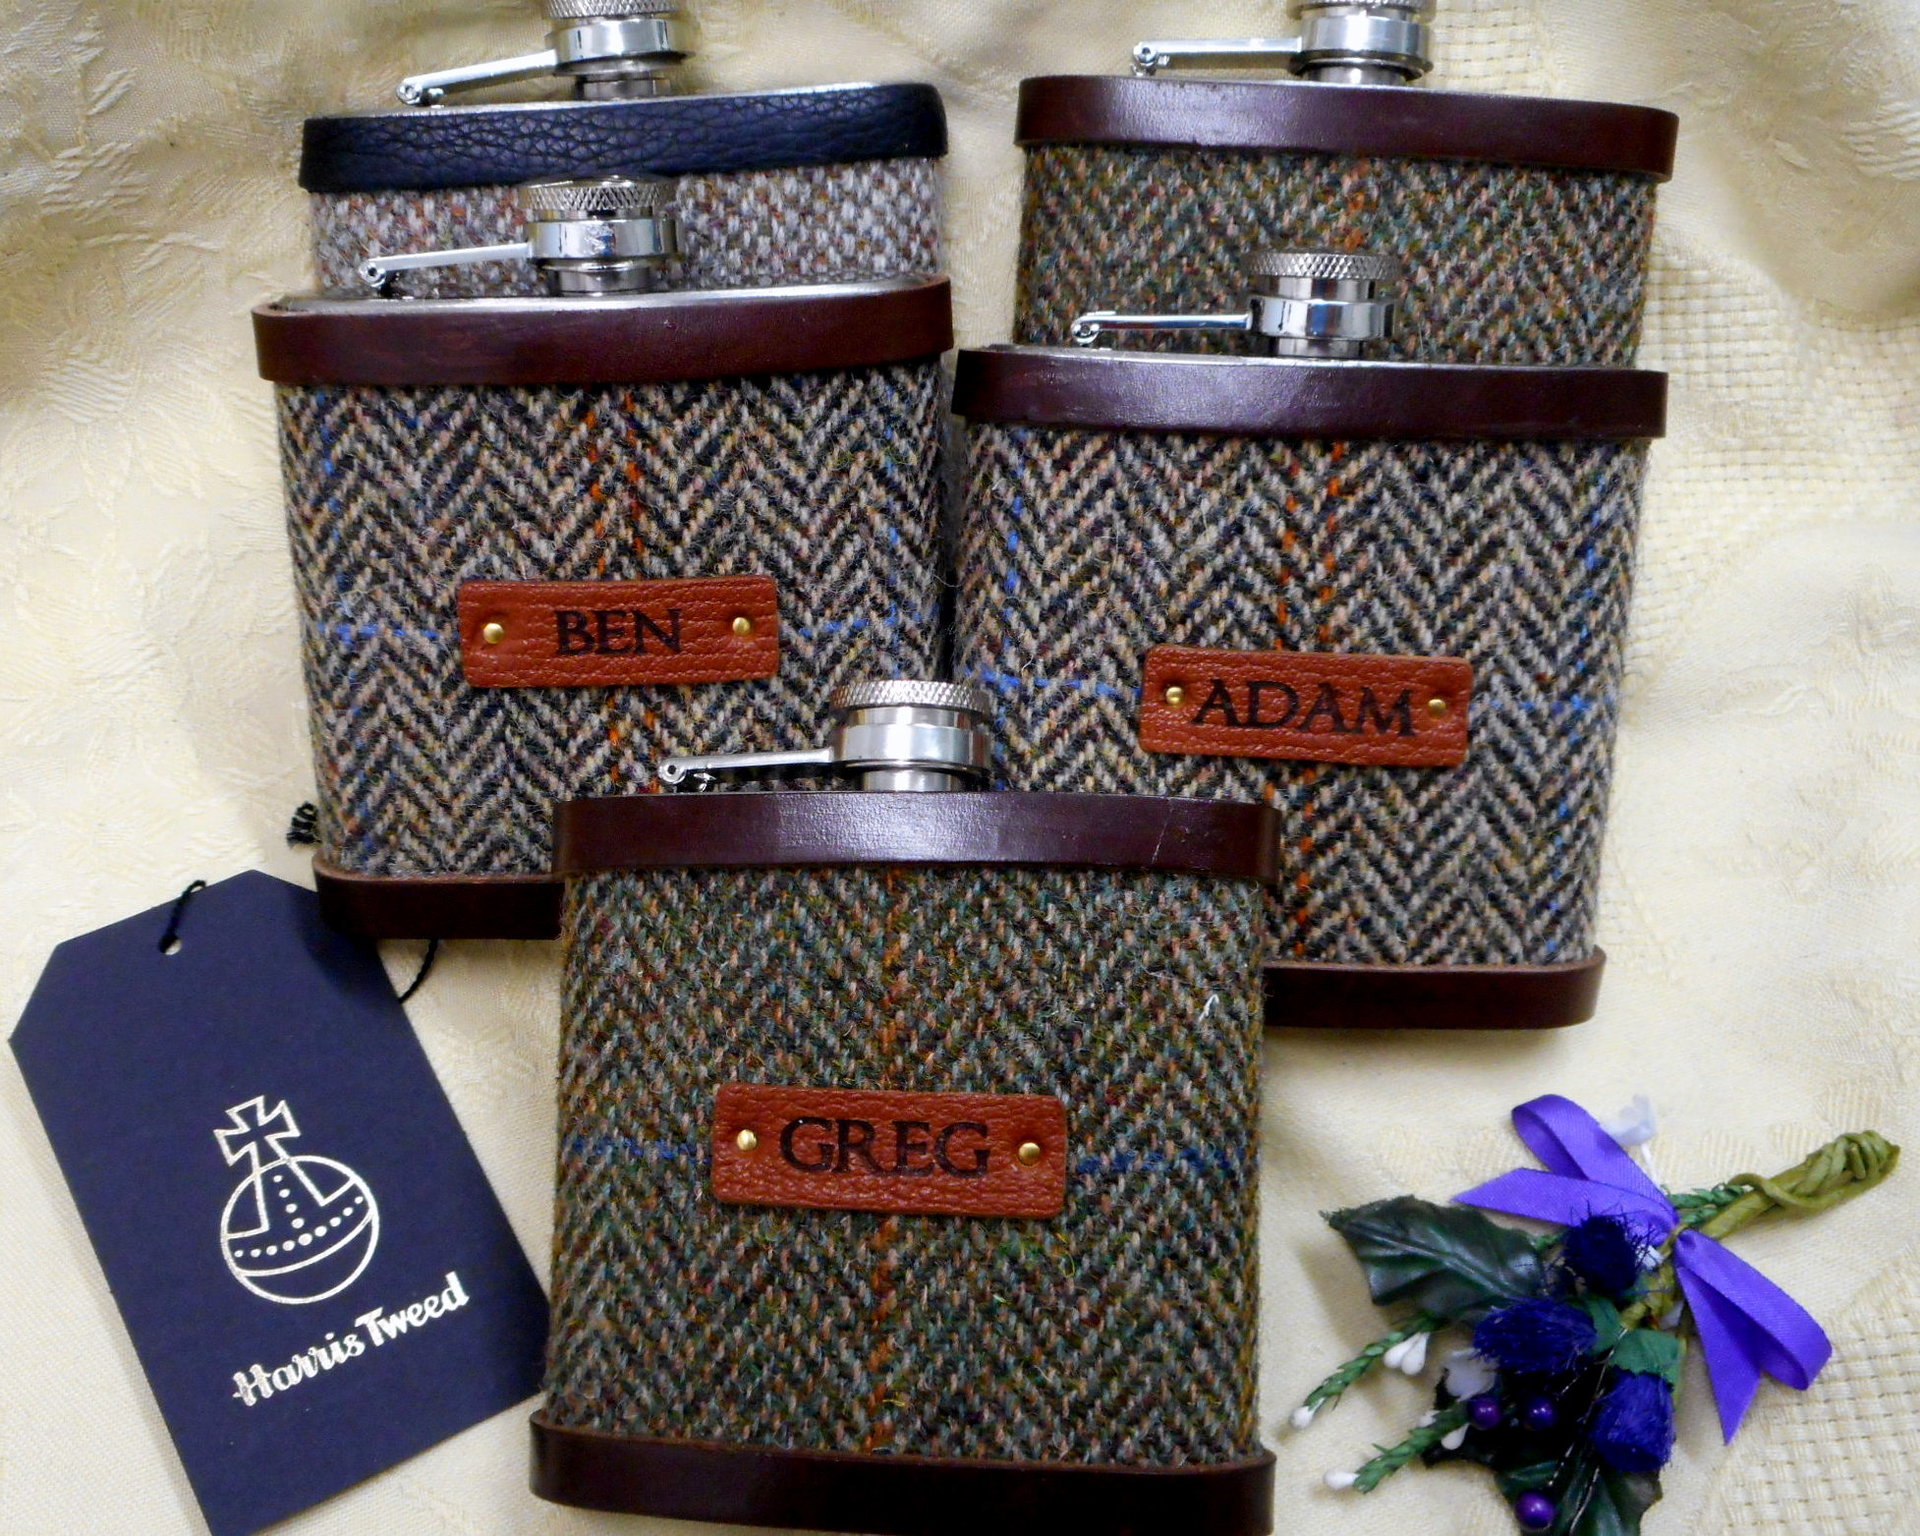 Personalised Groomsman gifts  Harris Tweed hip flasks with individual names on leather labels Scottish luxury gift for wedding  Best Man, Usher, Father of Bride or groom, choice of tweeds.